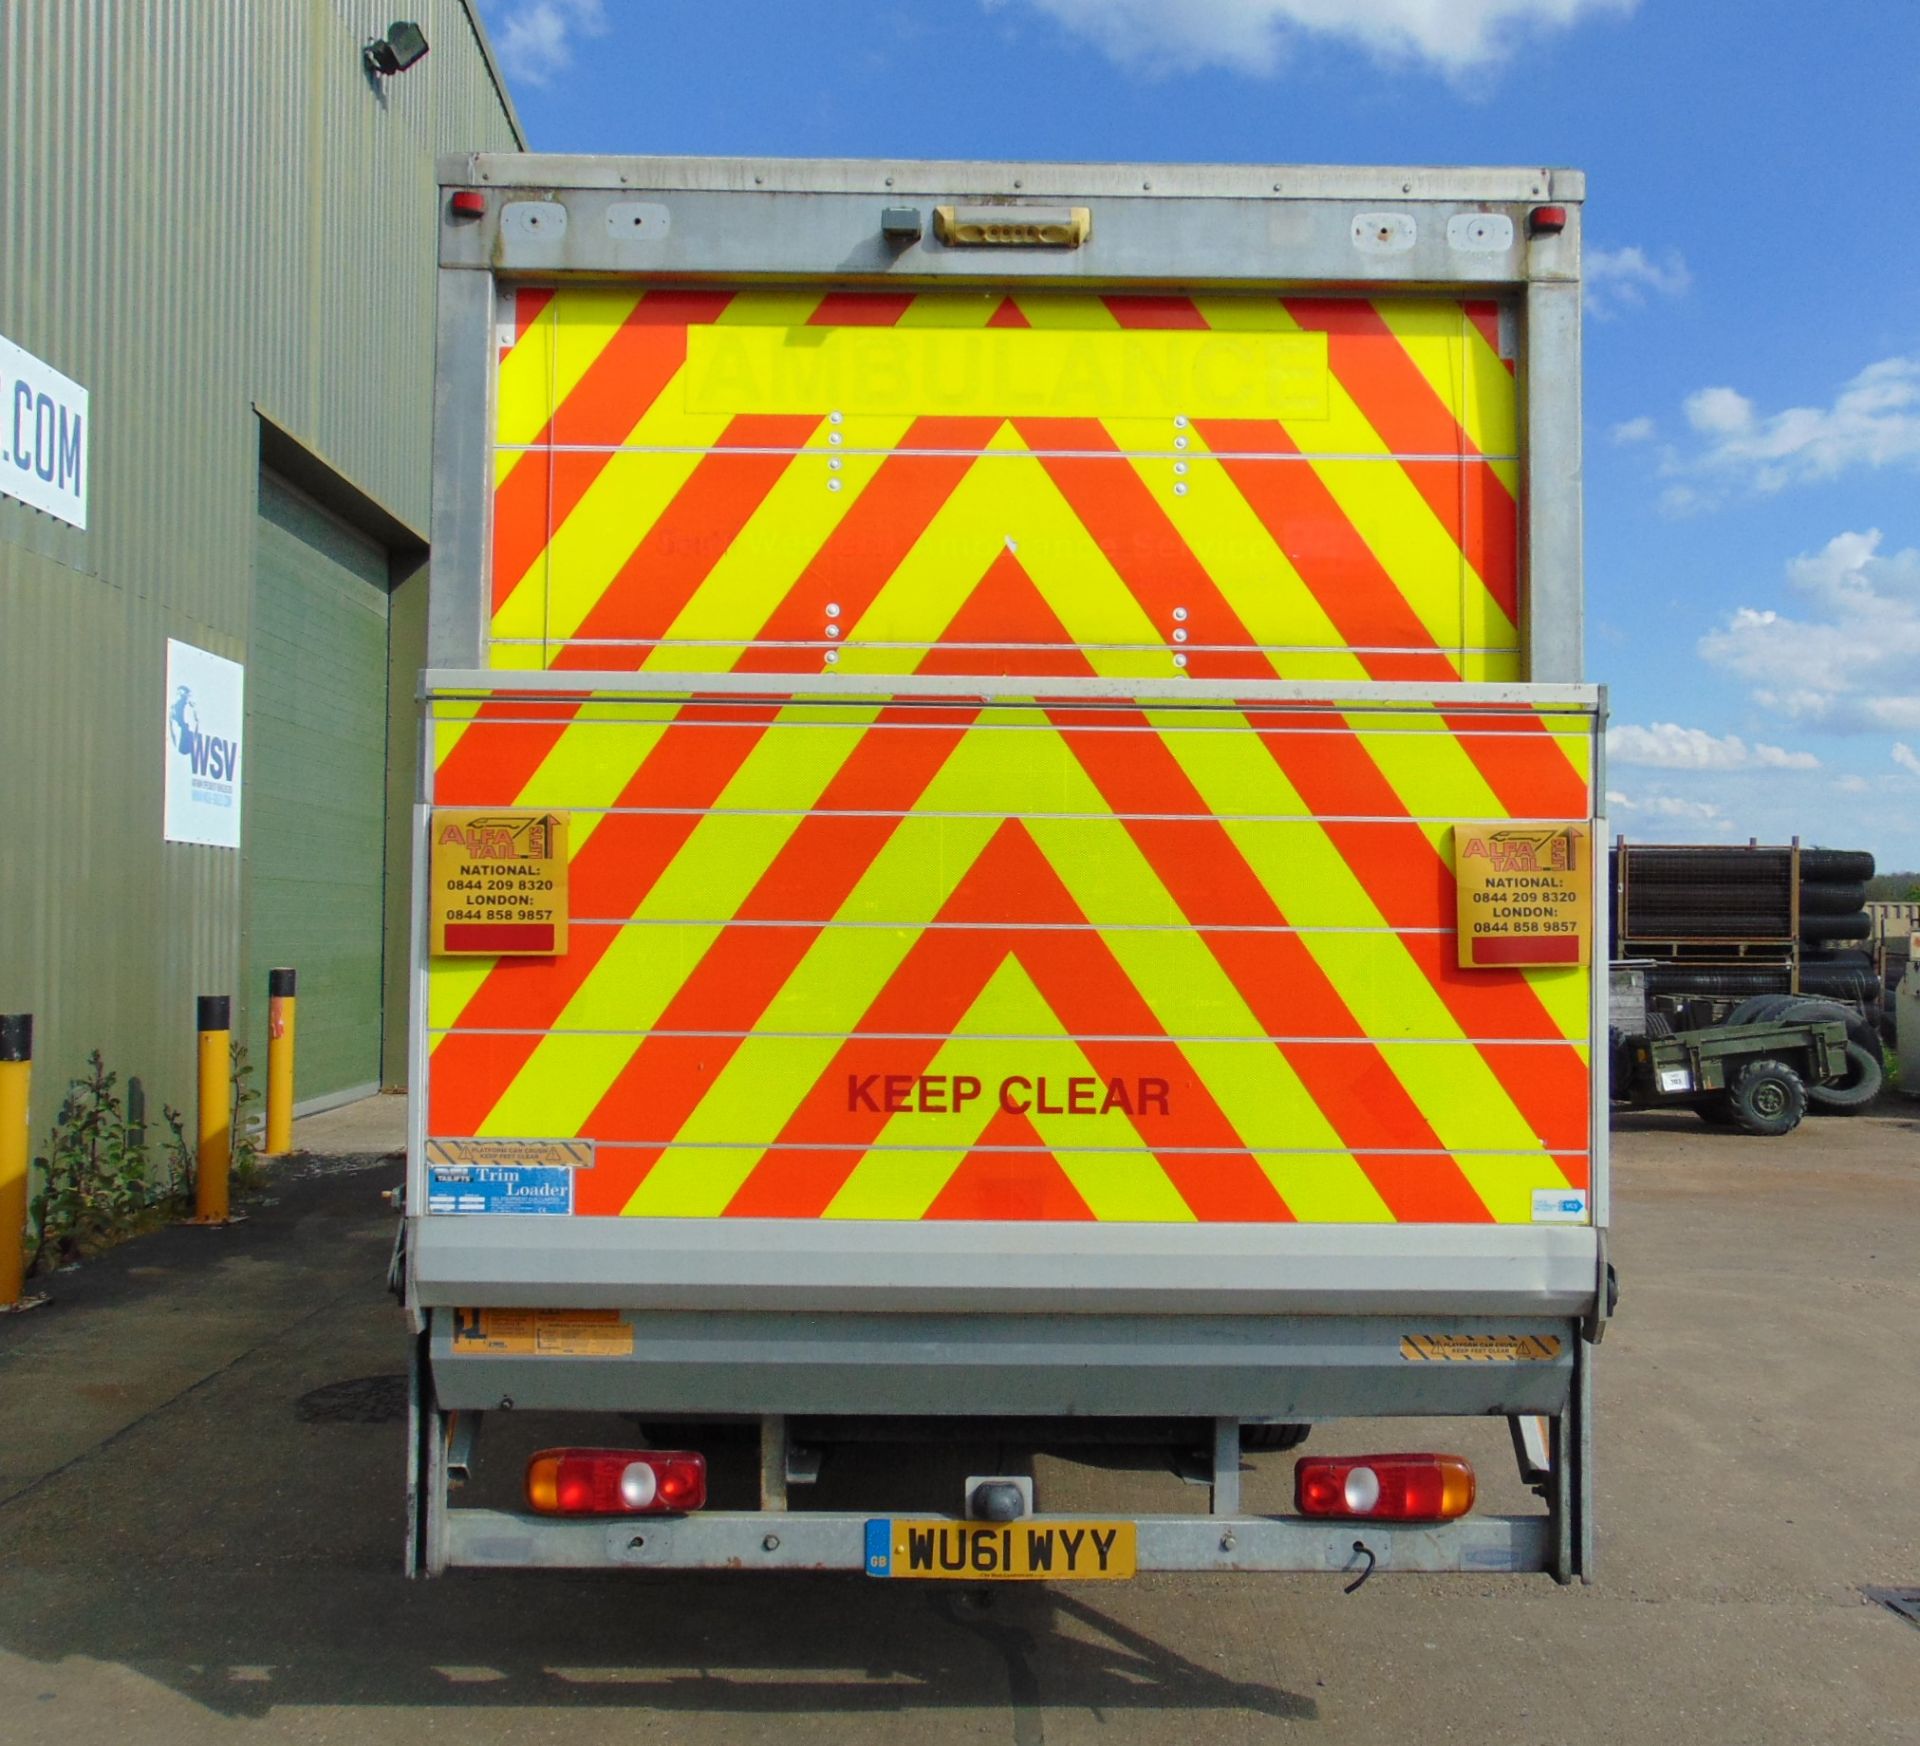 2016 Iveco Daily 70C21 4 x2 3.0Ltr Diesel - Incident Support Box Truck - Image 12 of 67